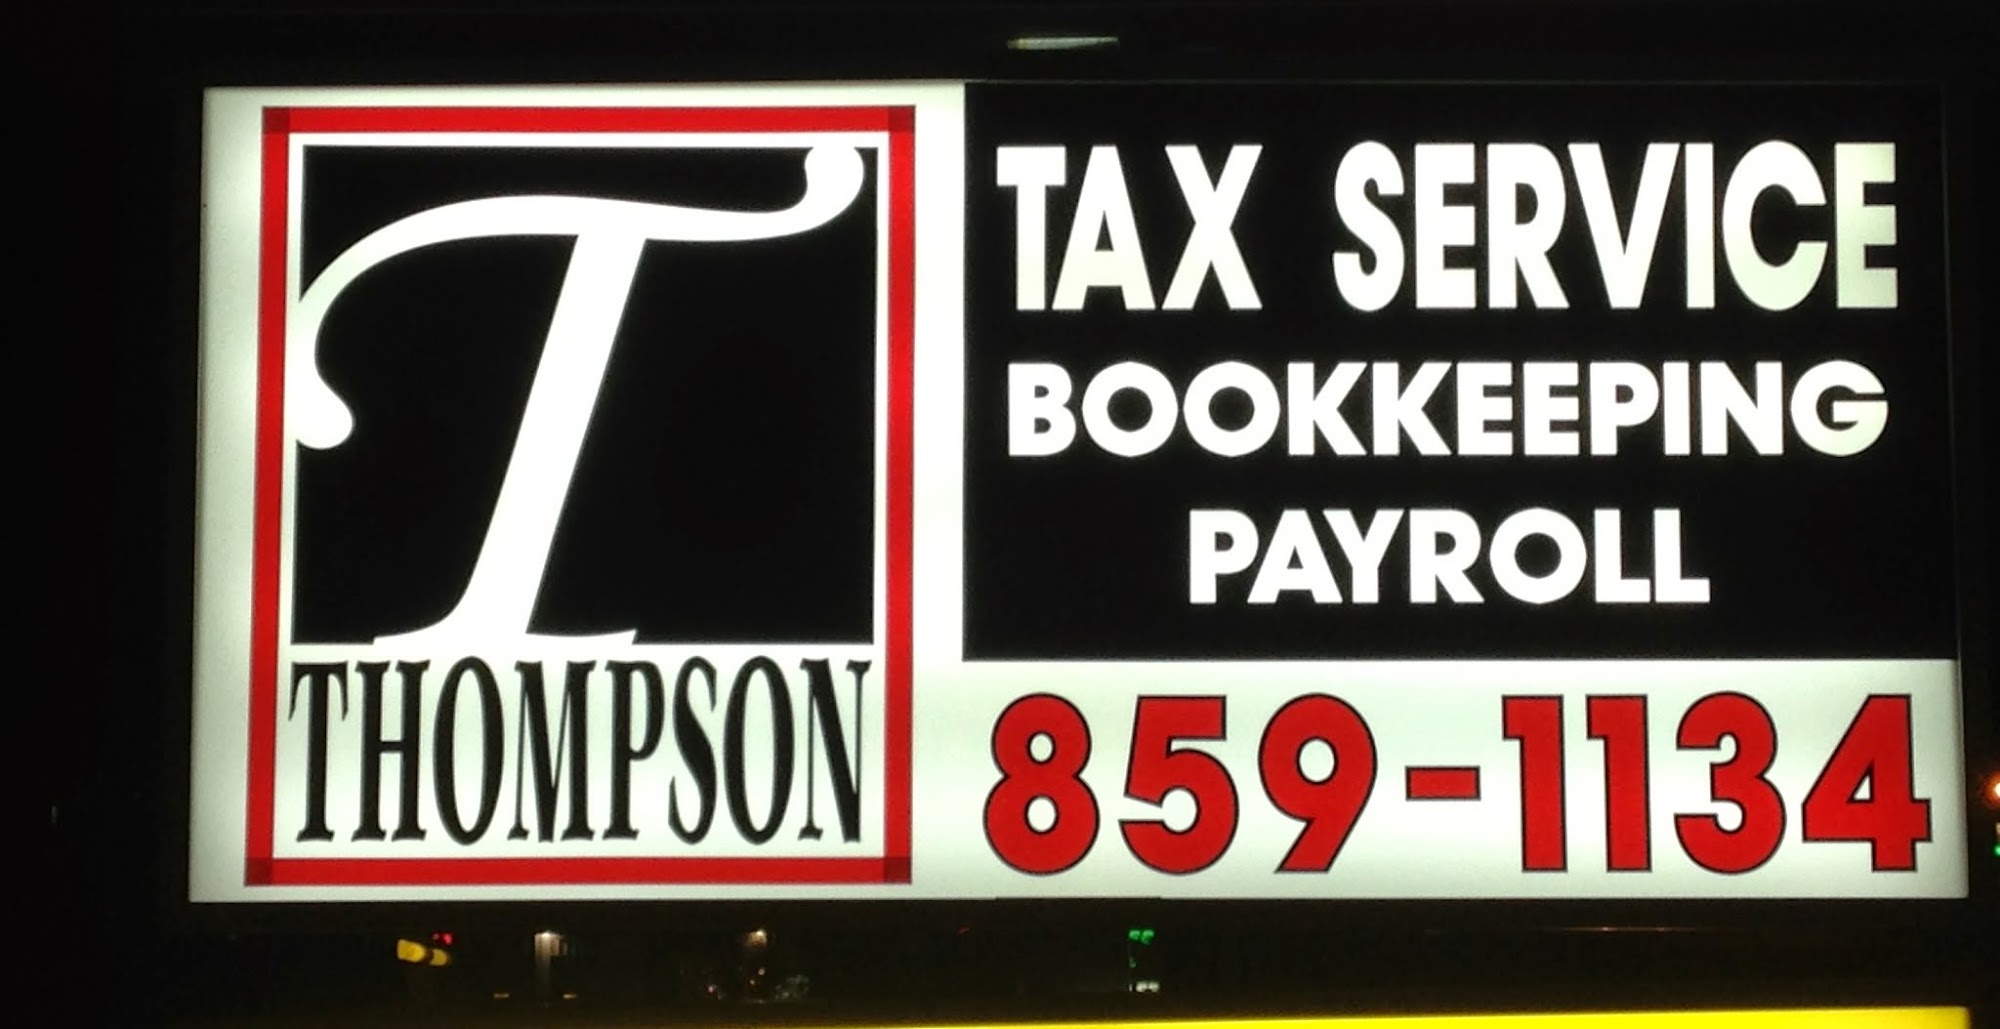 Thompson Tax & Accounting Service